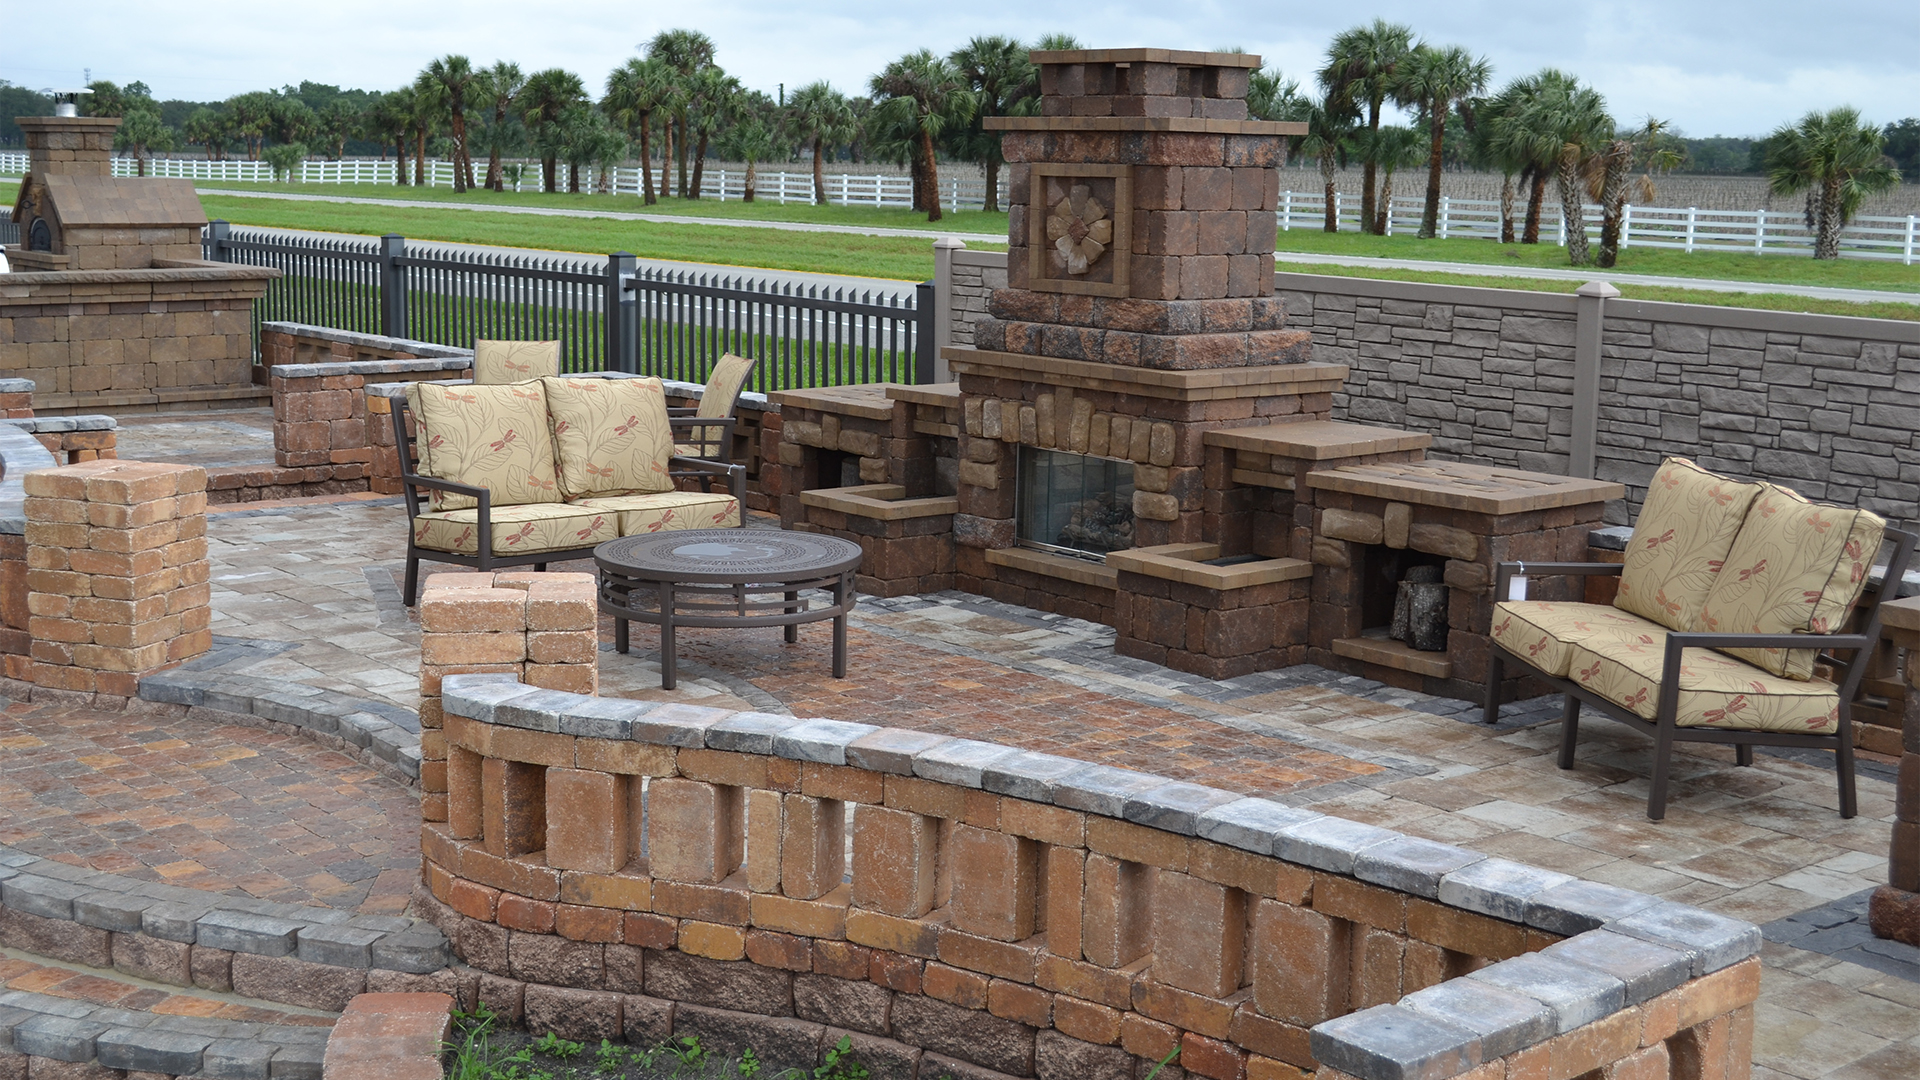 Danielle Fence & Outdoor Living | Danielle Fence Showroom - Fireplace